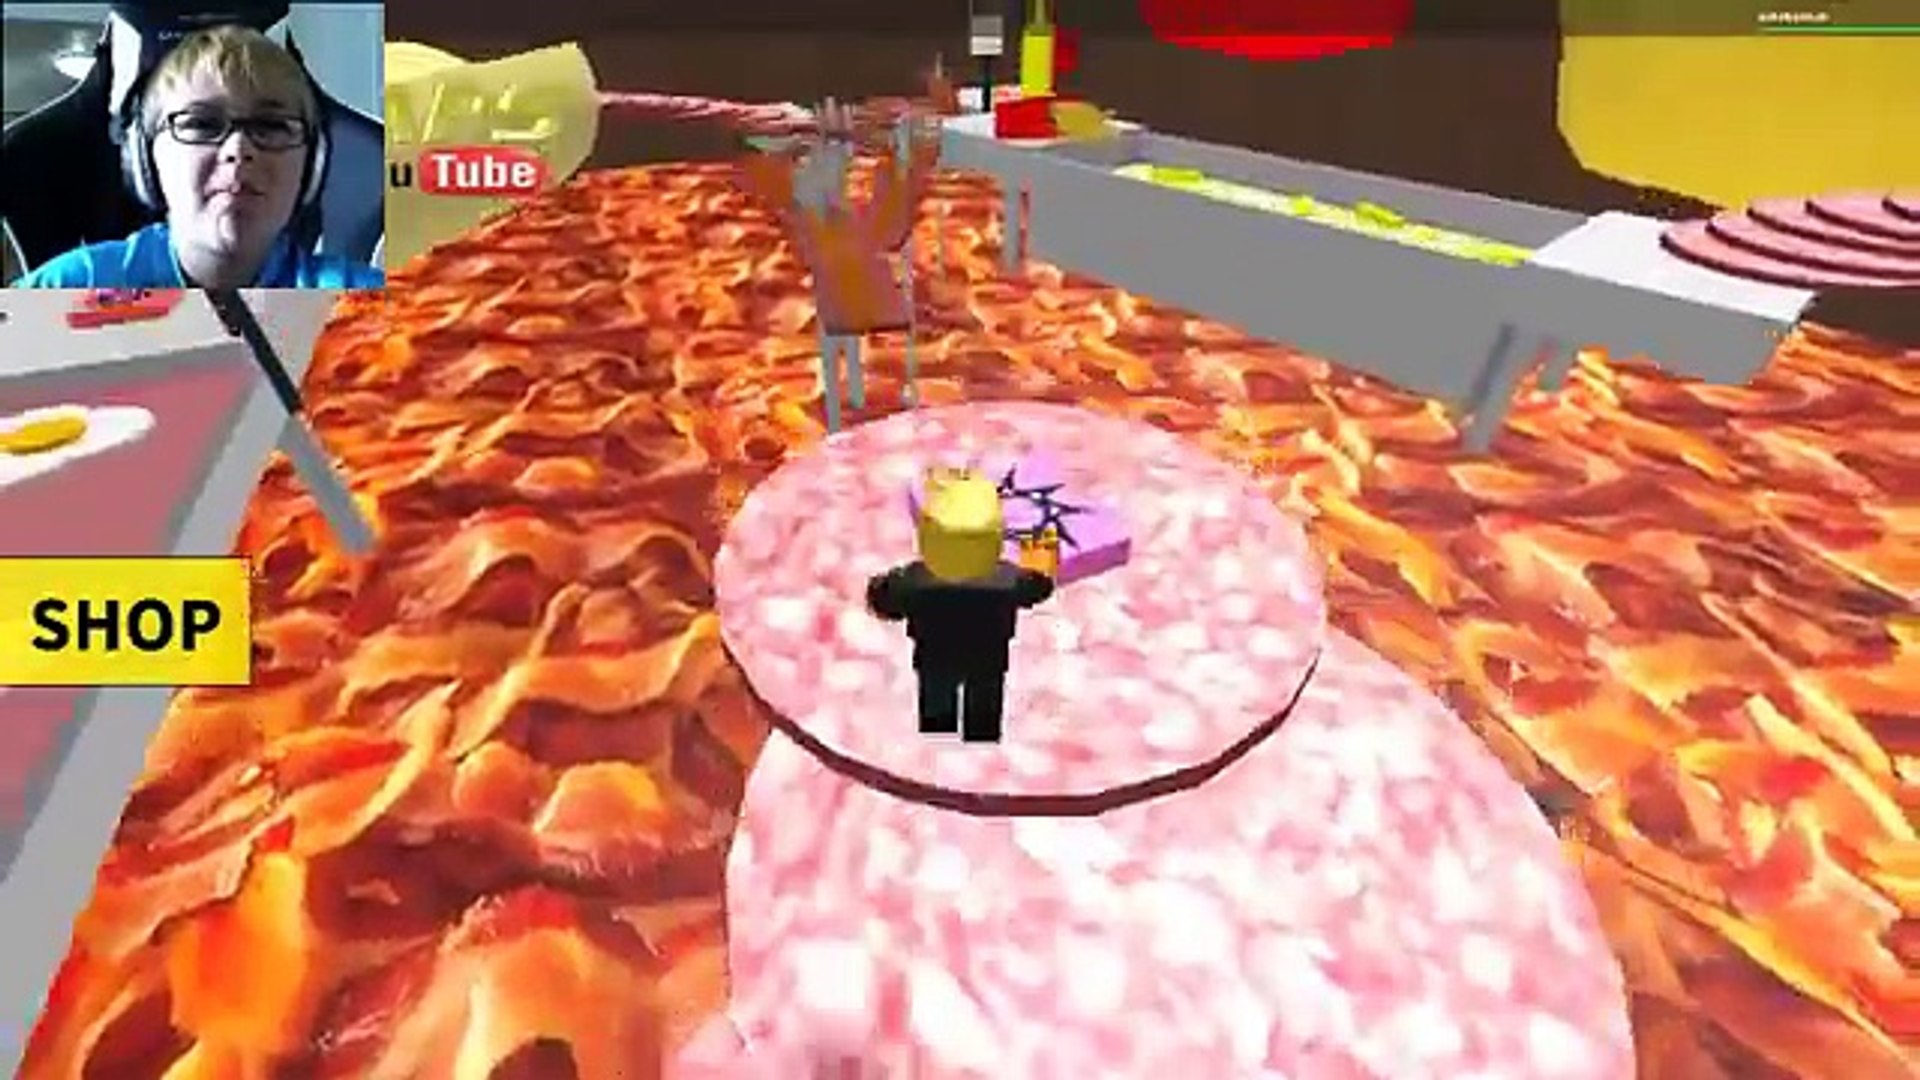 Auto Plays Roblox Escape A Giant Burger Obby Radiojh Games Video Dailymotion - roblox escape the giant burger obby